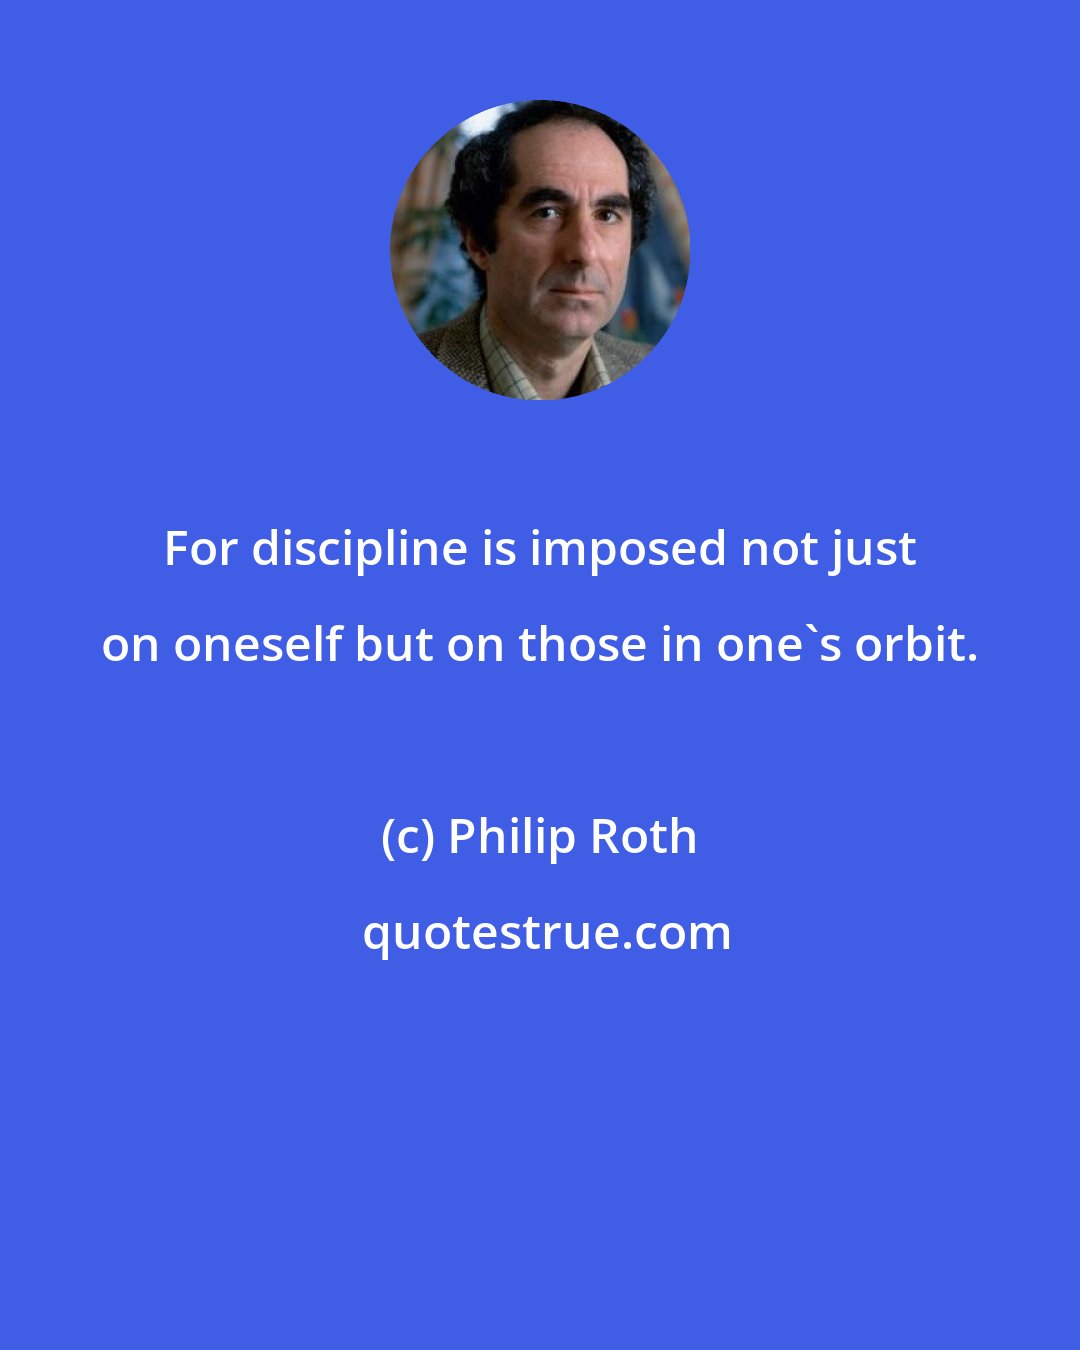 Philip Roth: For discipline is imposed not just on oneself but on those in one's orbit.